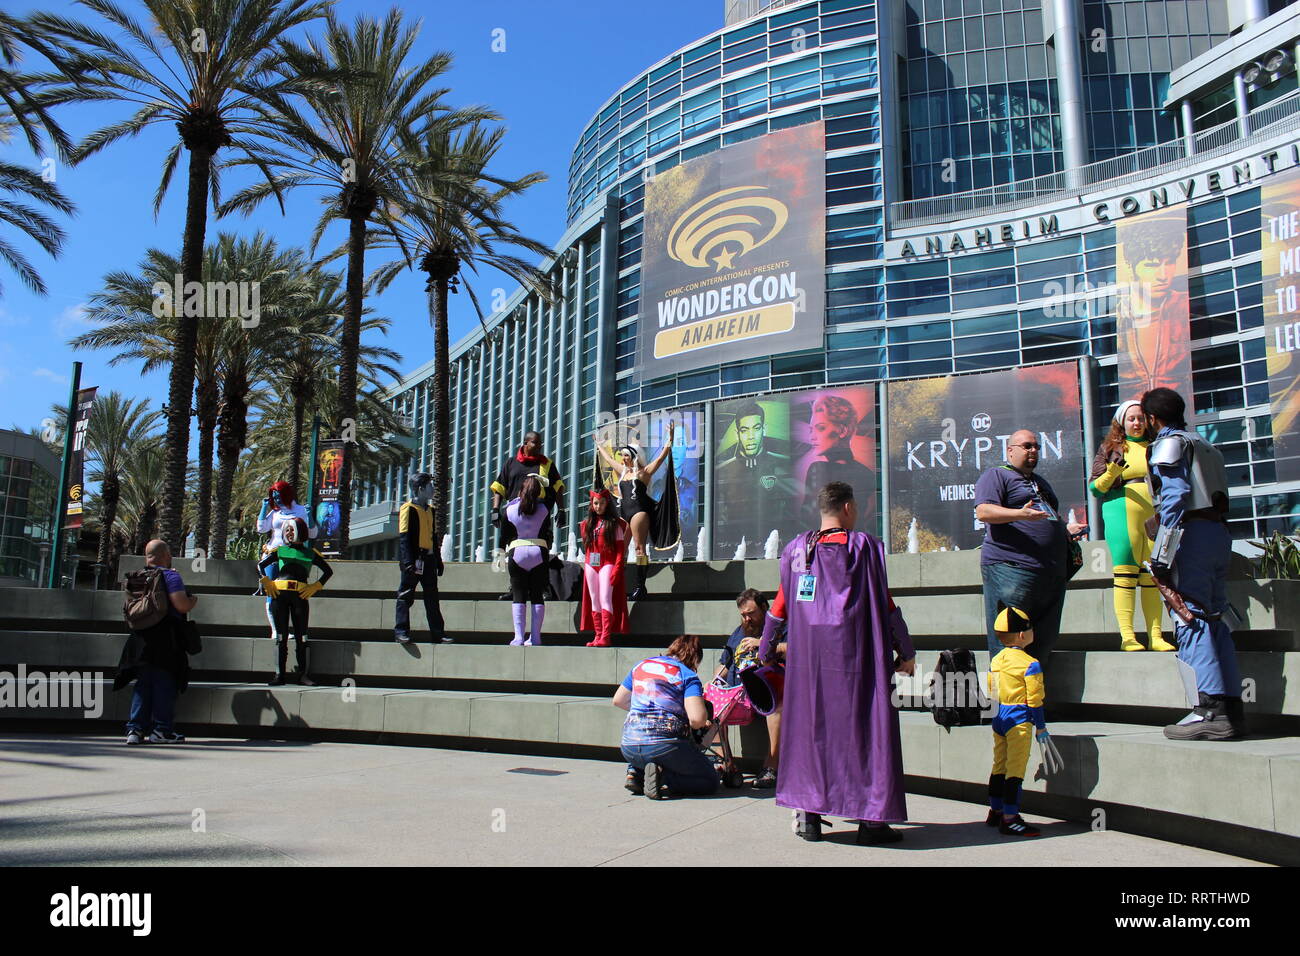 Attendees of Wondercon milling around in their costumes in front of the Anaheim Convention Center Stock Photo